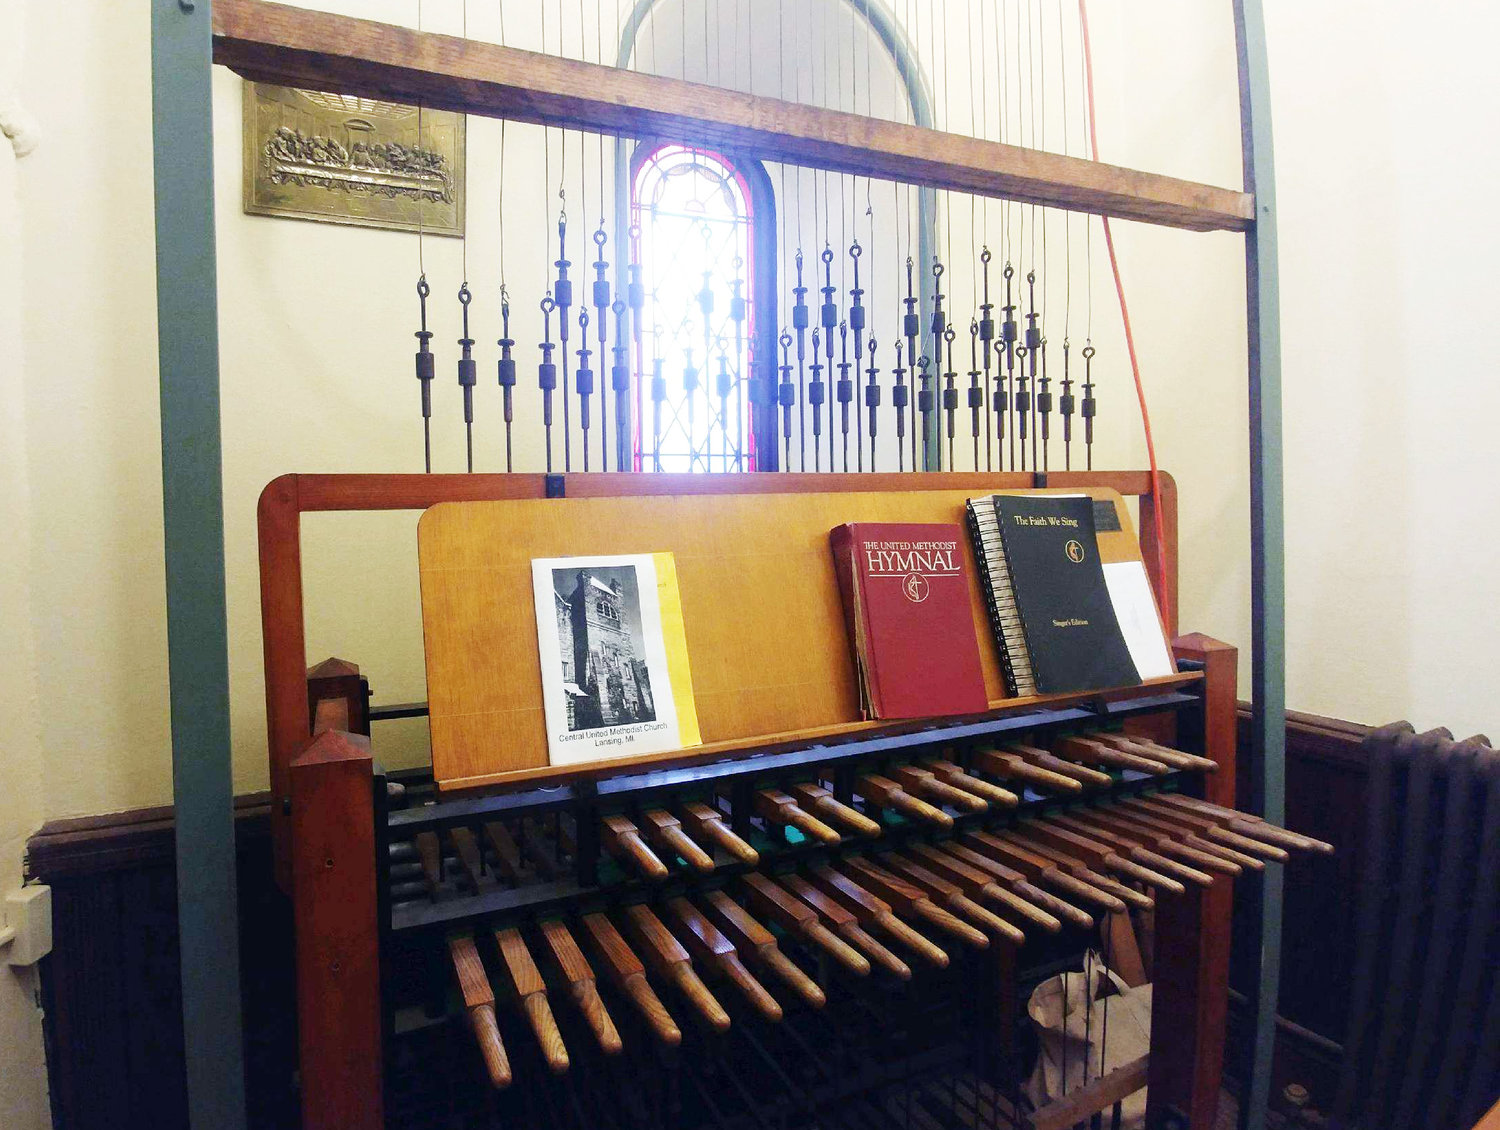 The Central United Methodist Church carillon was installed in 1951 with 36 bells ranging from 9 to 760 pounds.